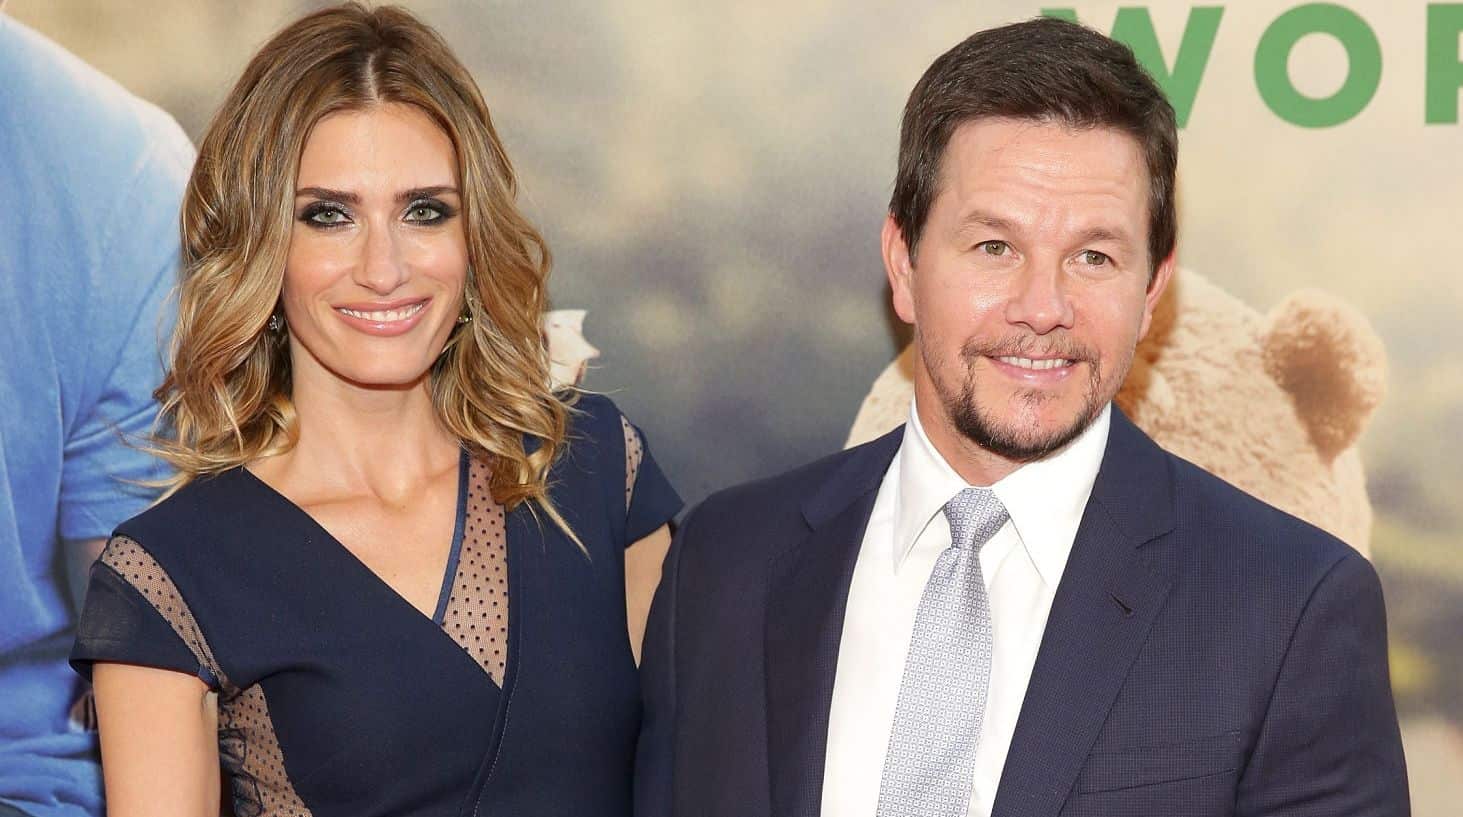 Who is the wife of Mark Wahlberg?